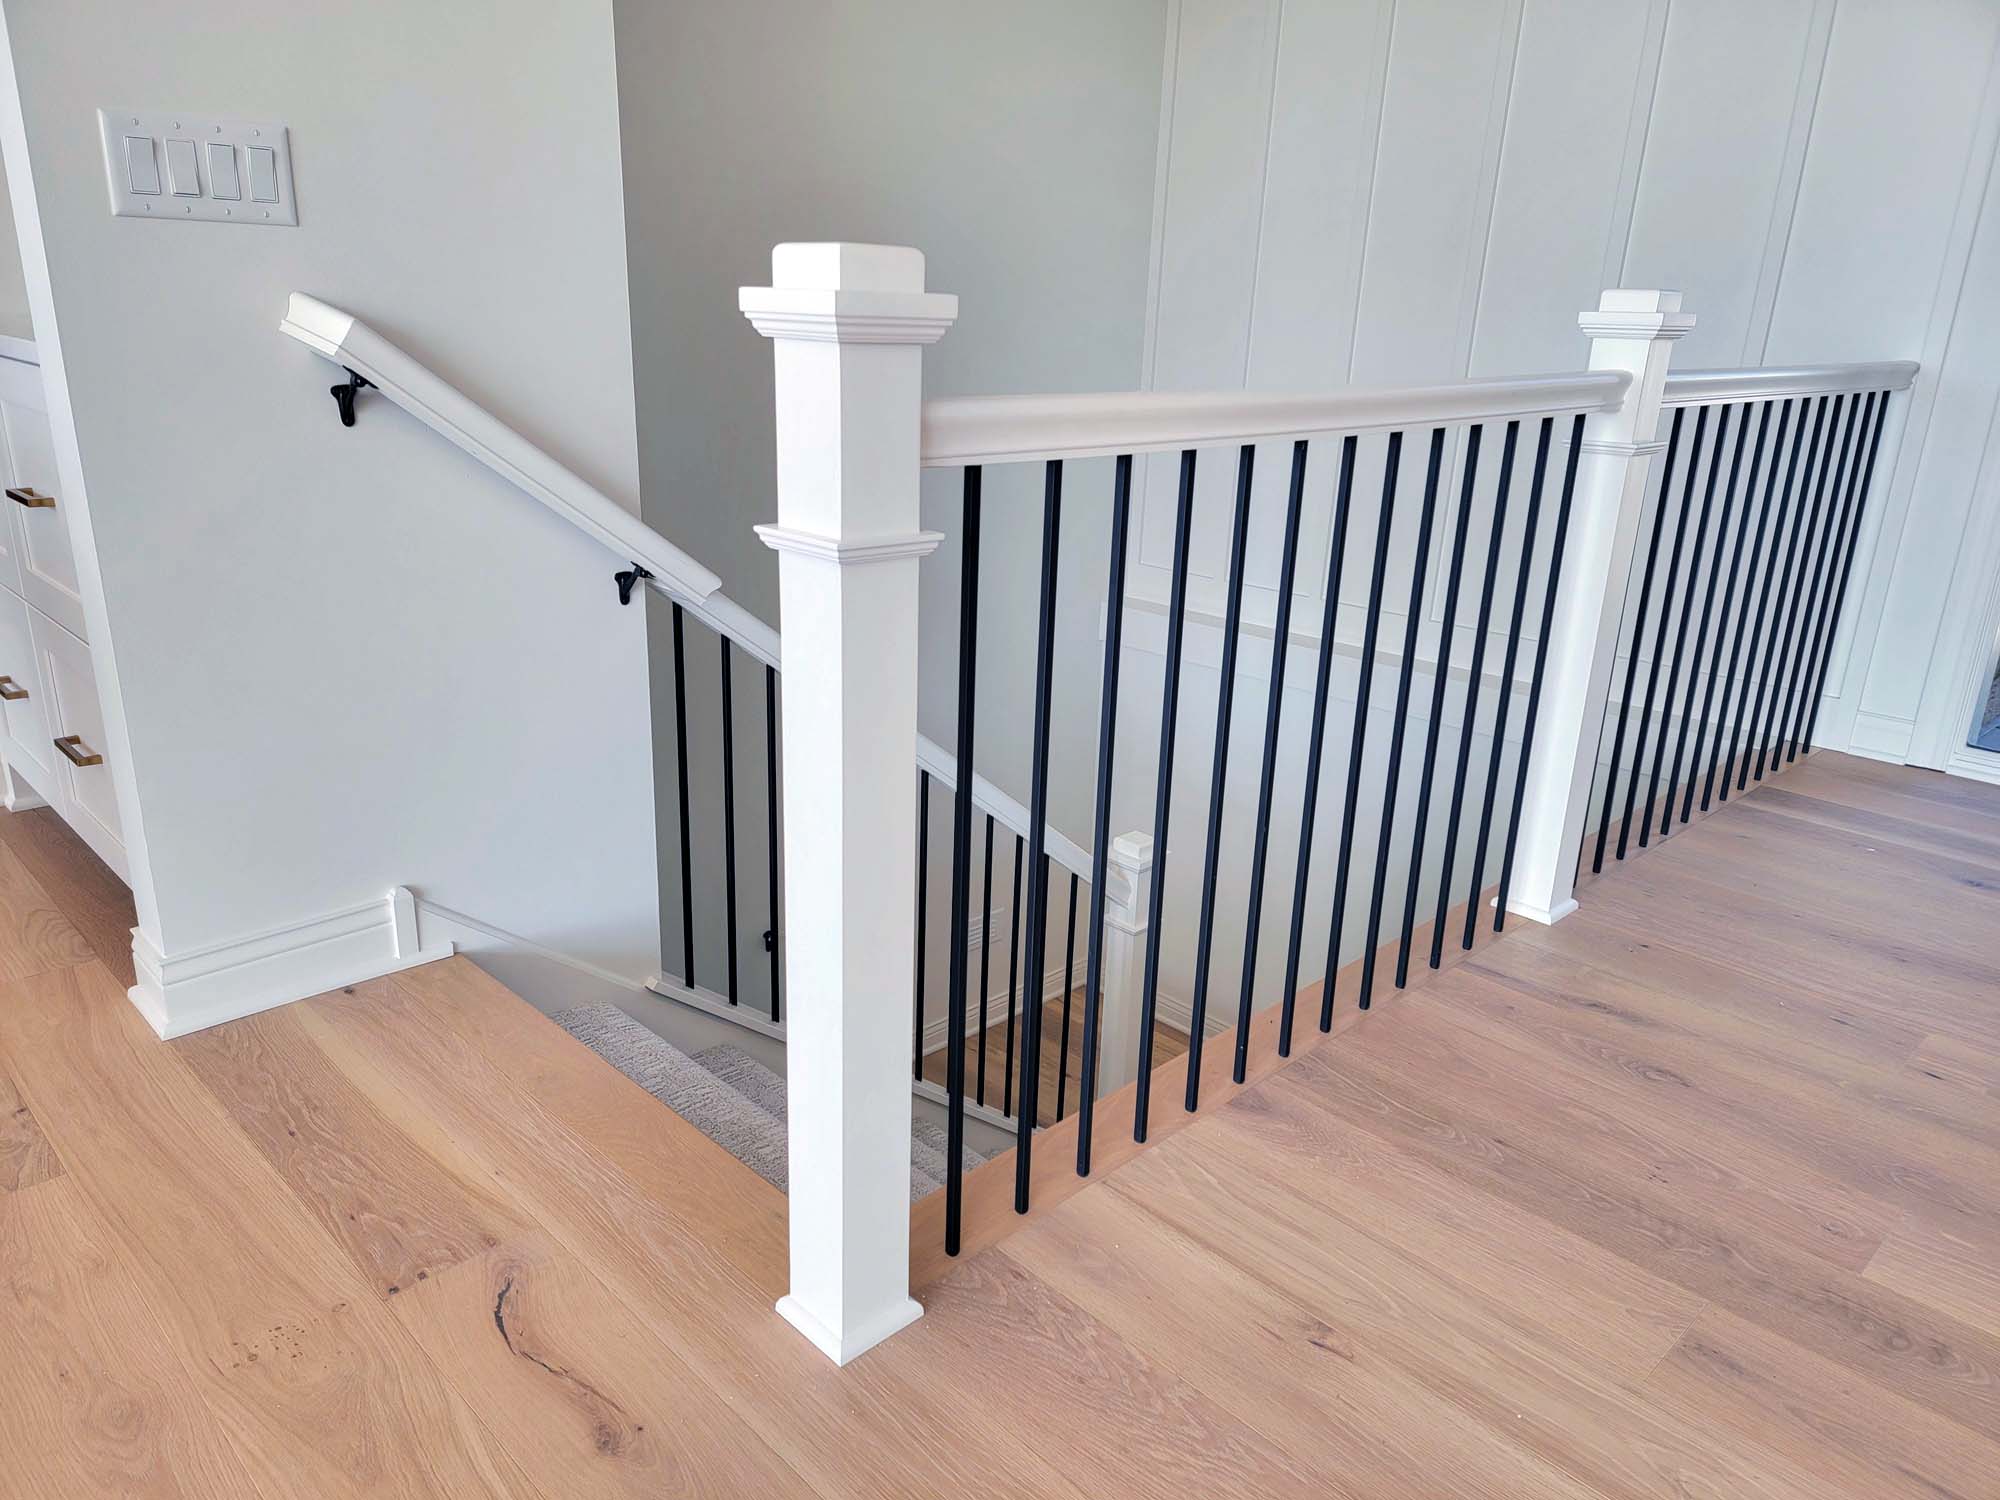 White enameled balusters and handrails with black spindles